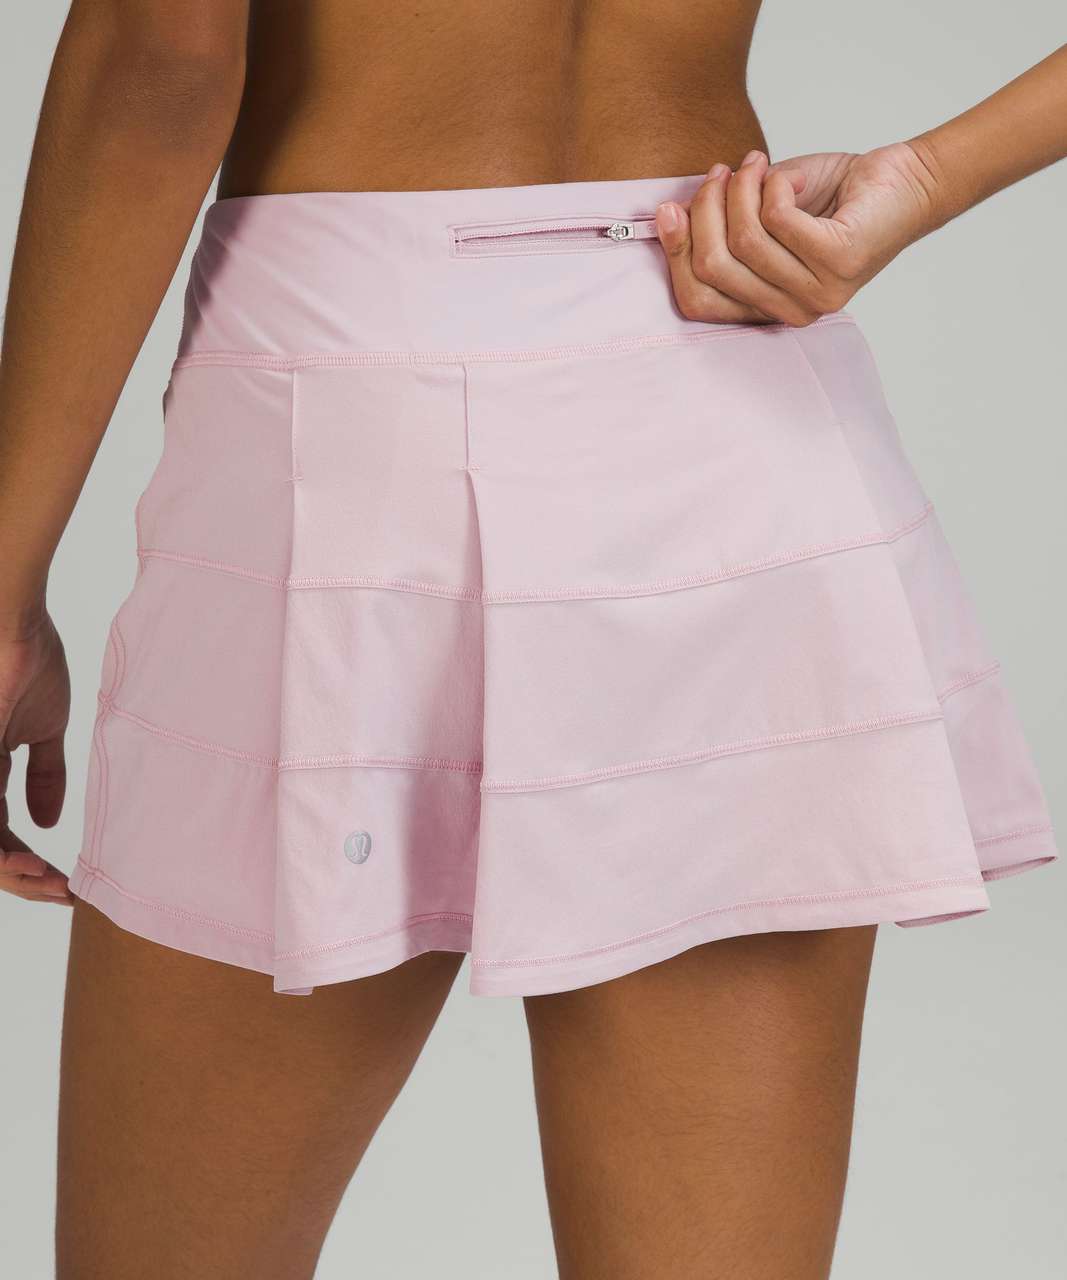 Lululemon Pace Rival Mid-Rise Skirt - Pink Peony